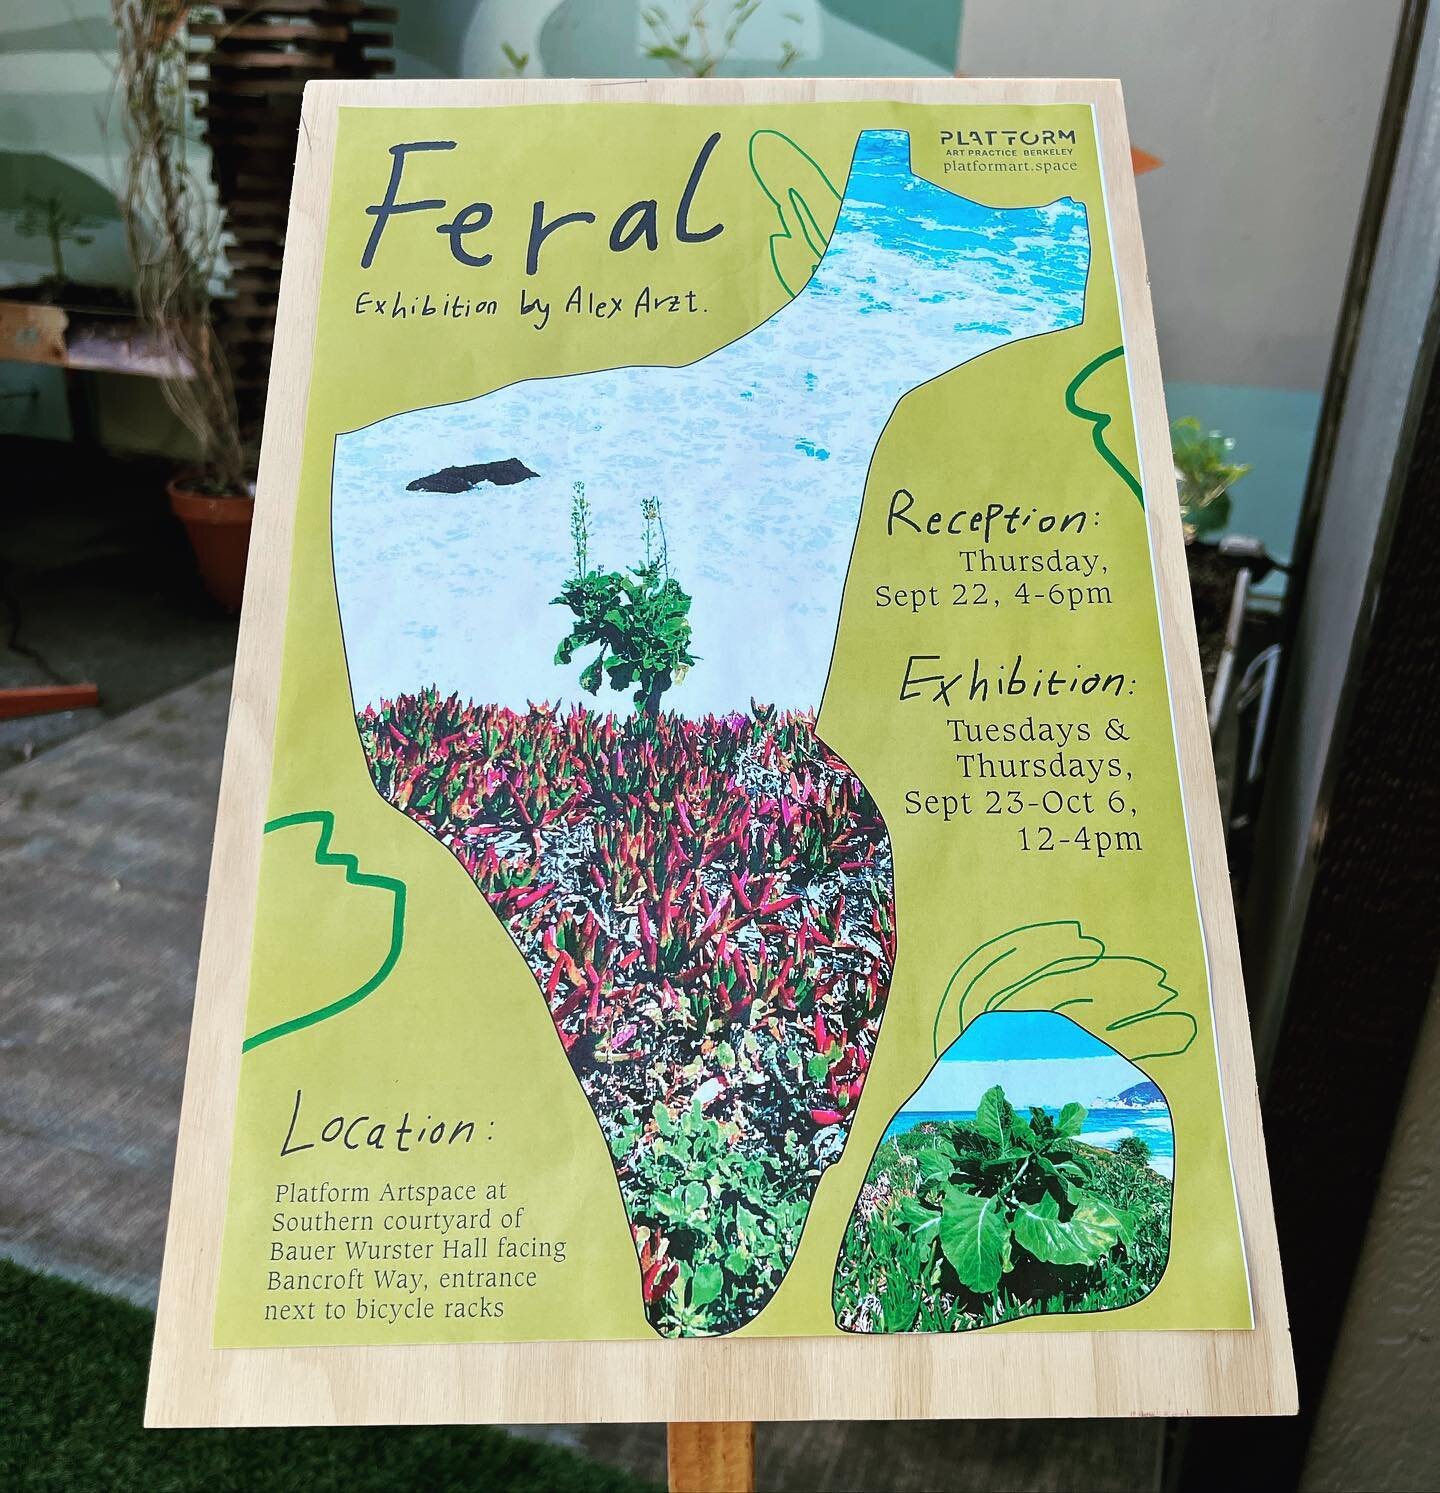 Happening NOW! 
&ldquo;Feral&rdquo; Art Opening
By Alex Arzt
4-6pm at Platform Artspace

Bay Area artist Alex Arzt explores the mysteries of wild local cabbages -  see the exhibit and pick up her stunning publication. 

Platform Artspace is a social 